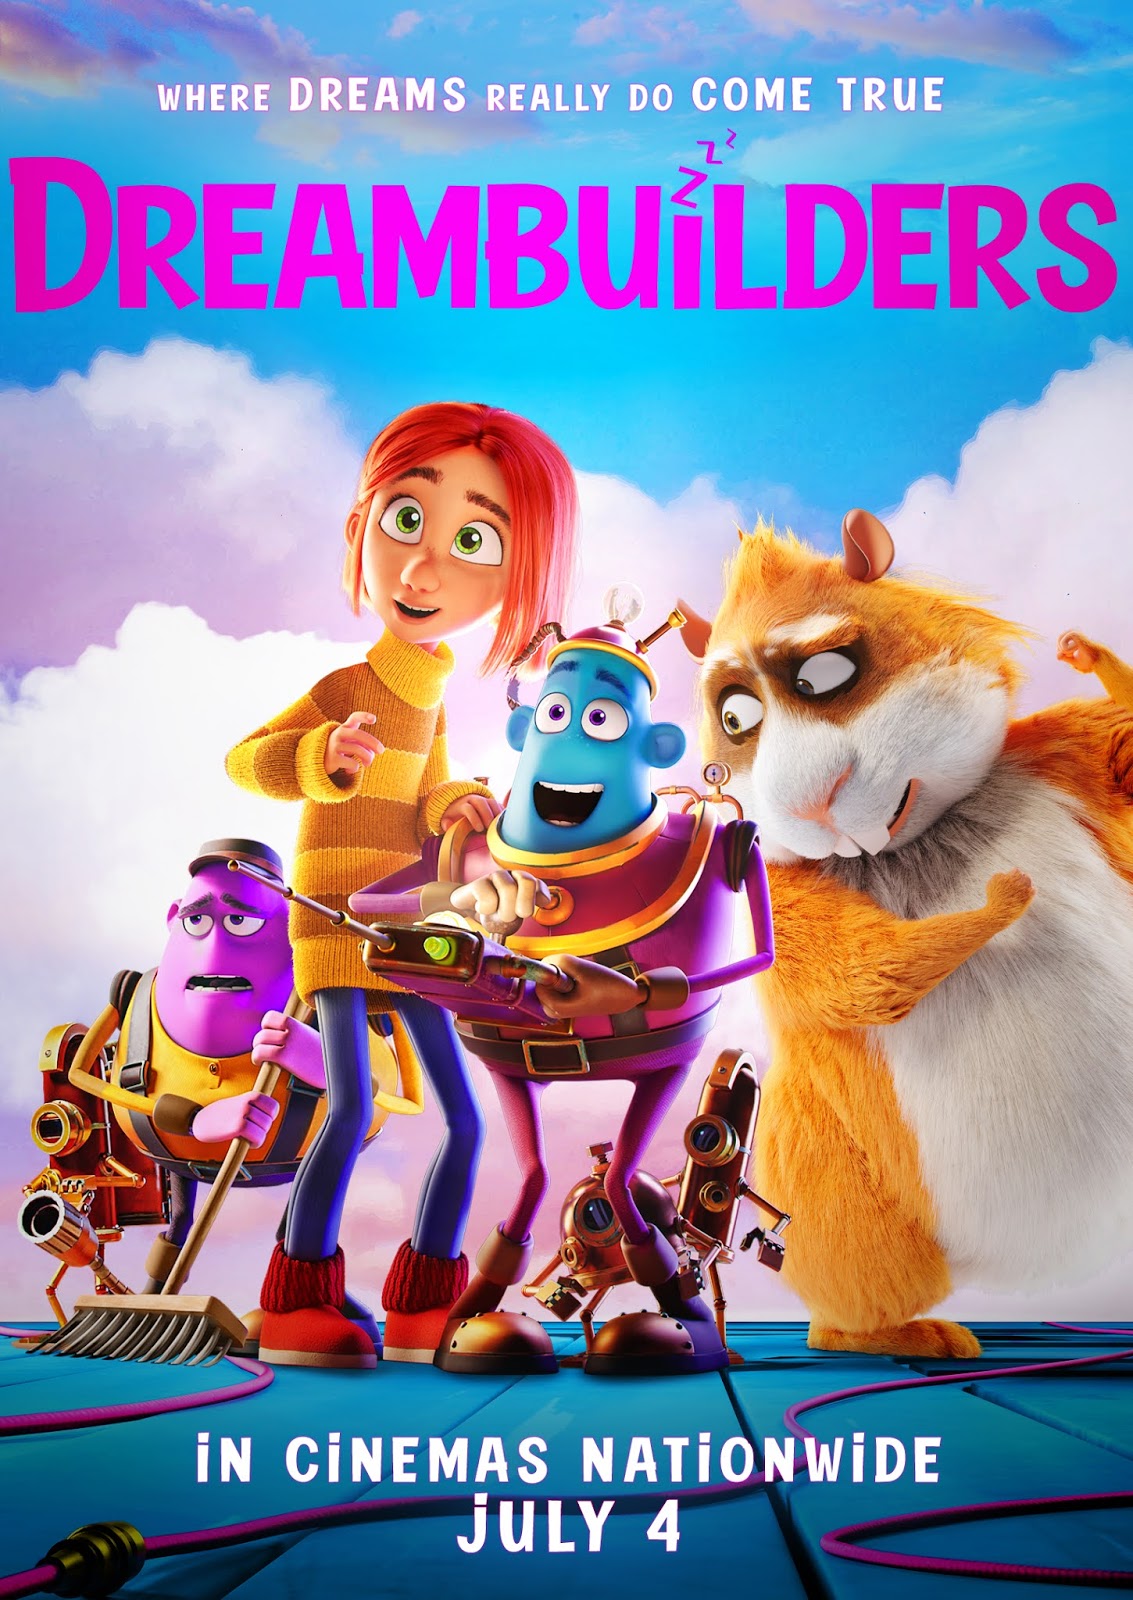 Film - Dreambuilders - The DreamCage